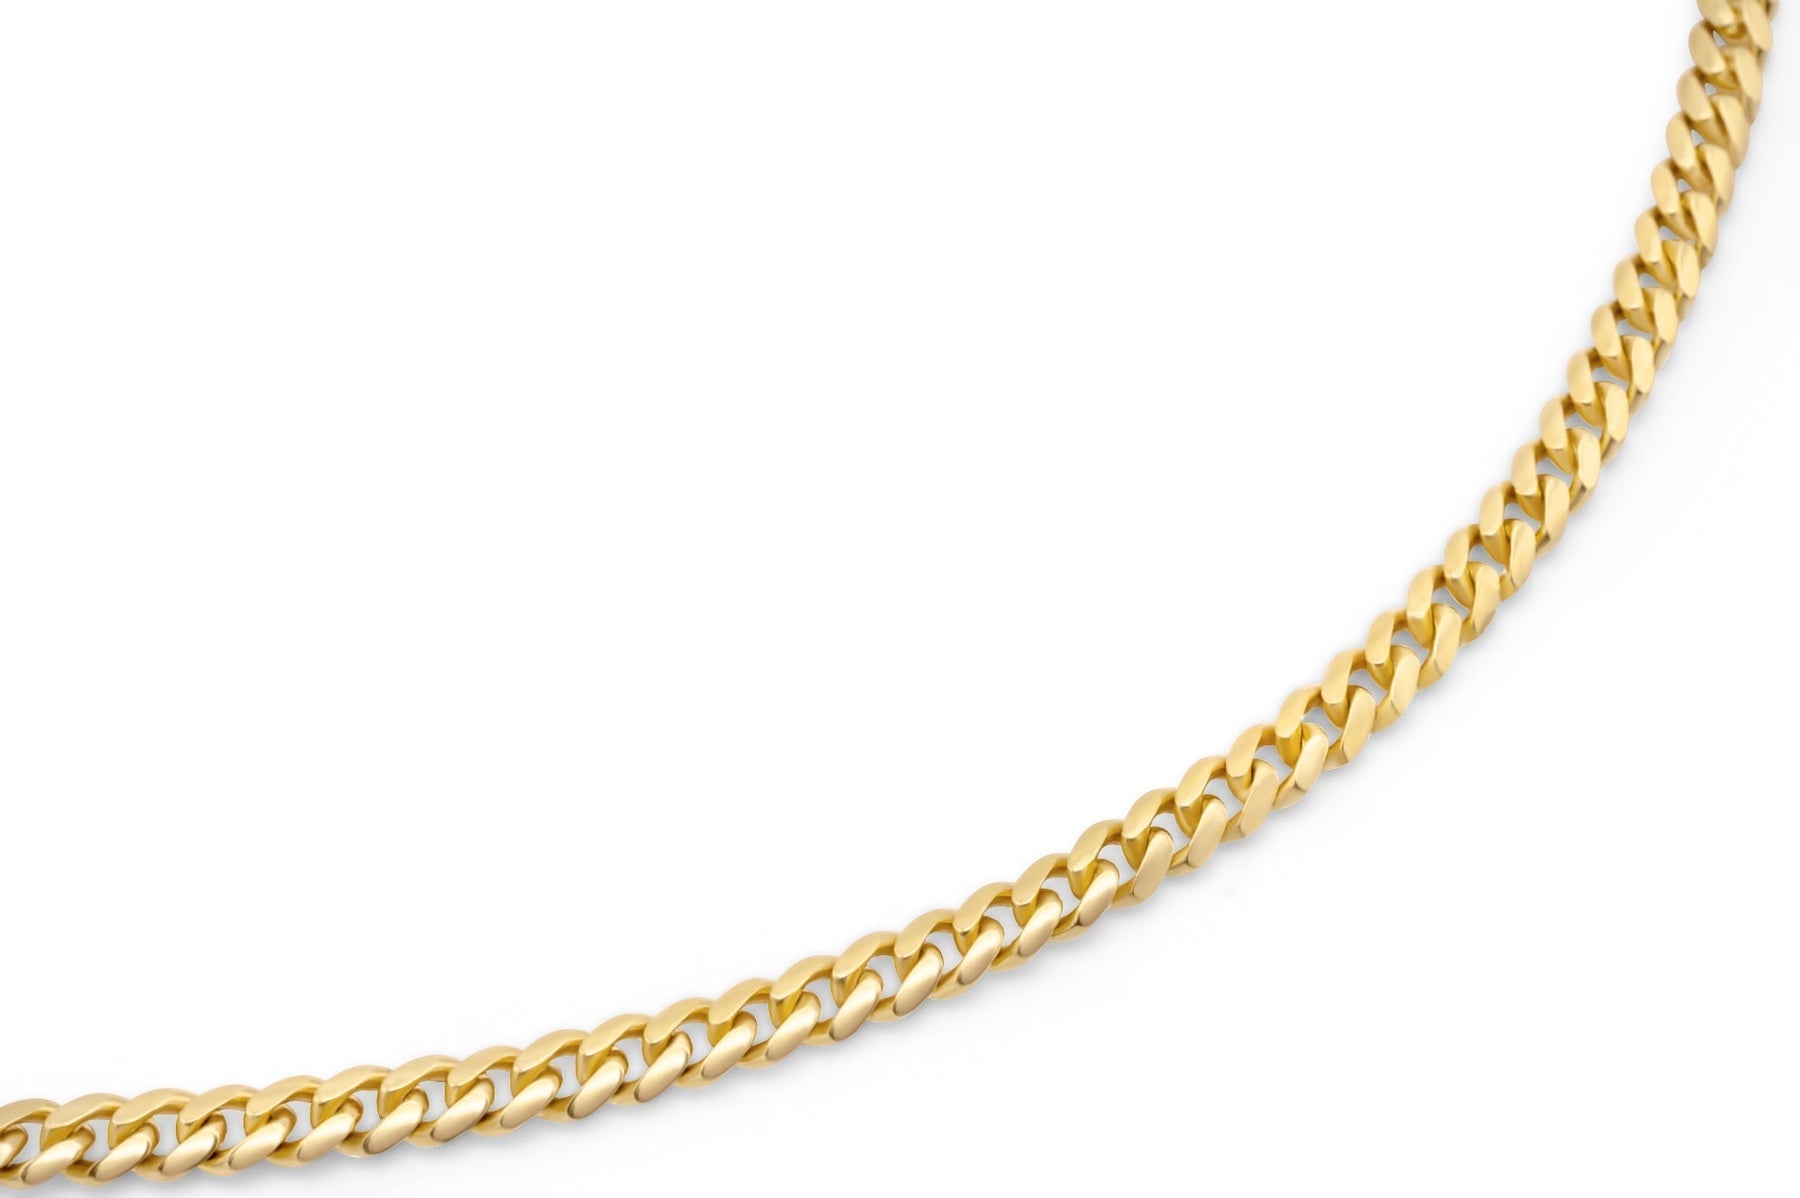 Gold Chain Necklace - African Bead Chain - 18-karat Yellow Gold Chain 20